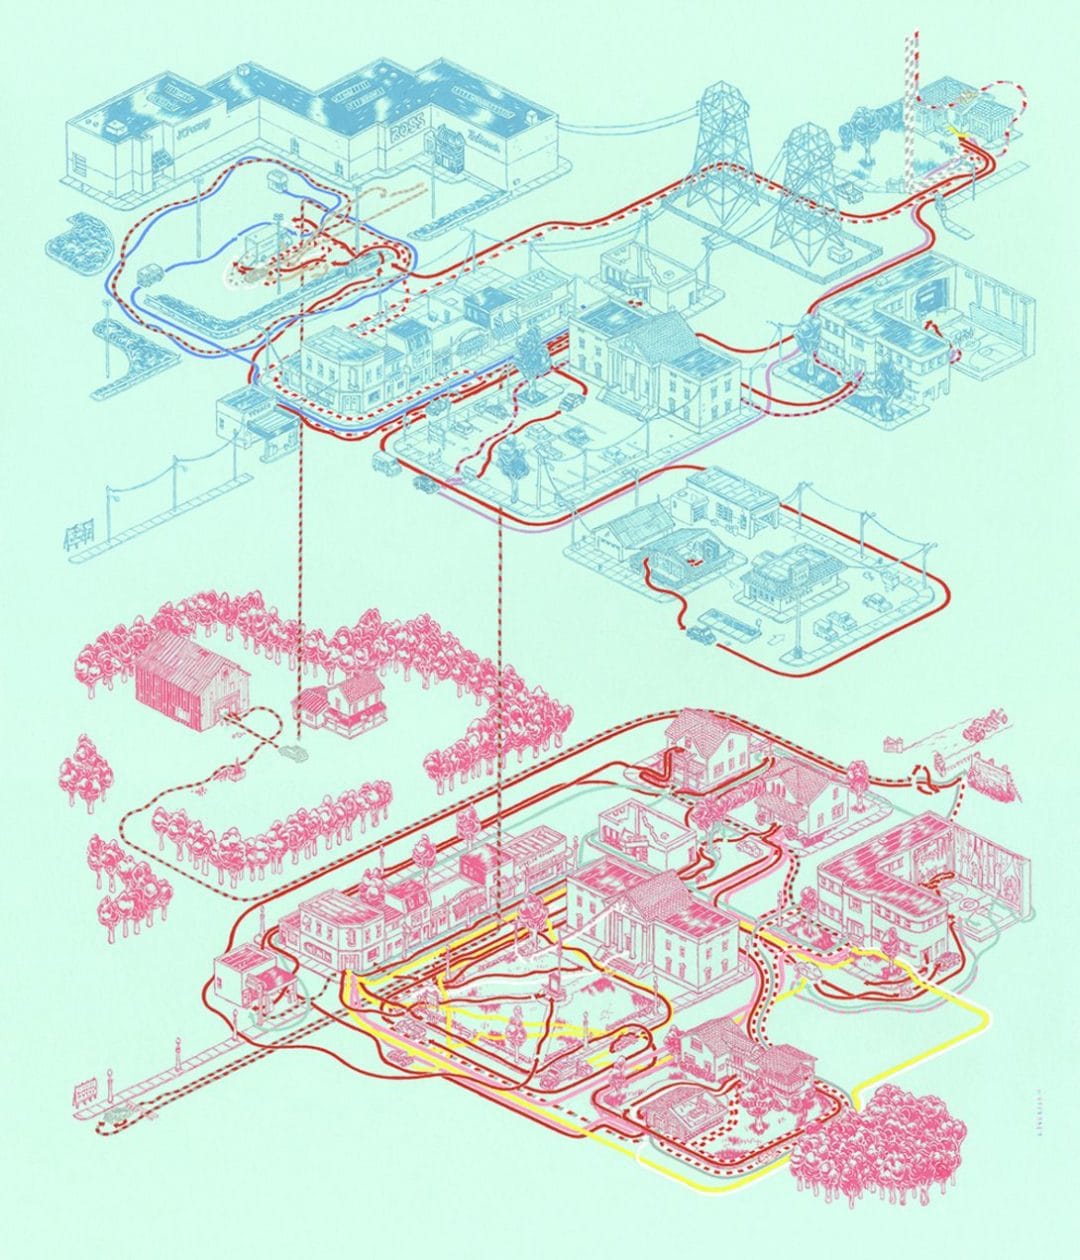 Andrew DeGraff, Paths of the Future